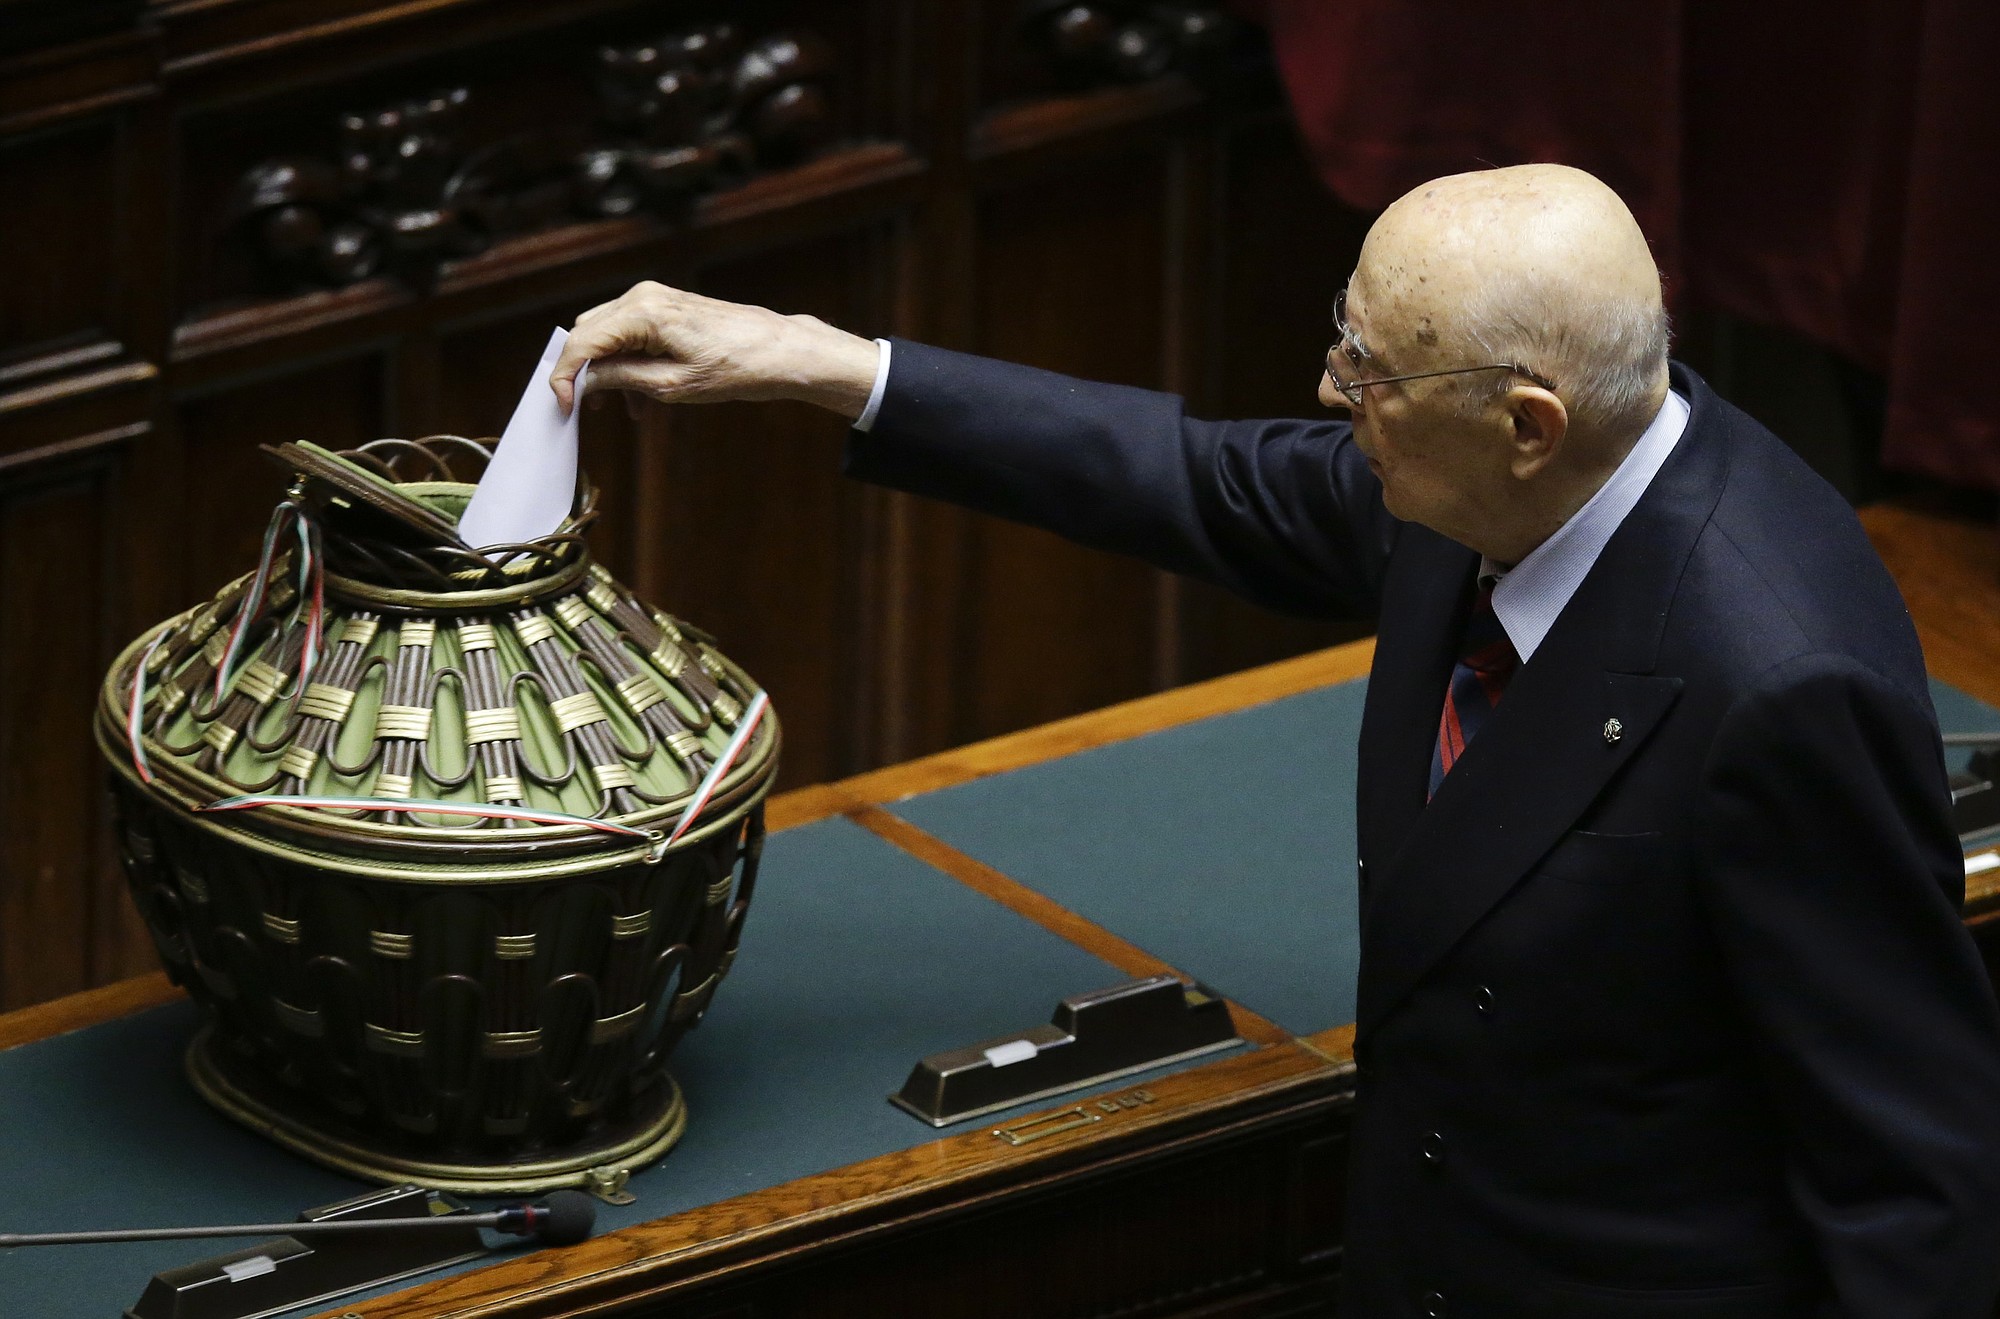 Former Italian President Giorgio Napolitano casts his vote Saturday at the lower chamber during a voting session for the election of the new Italian president in Rome.